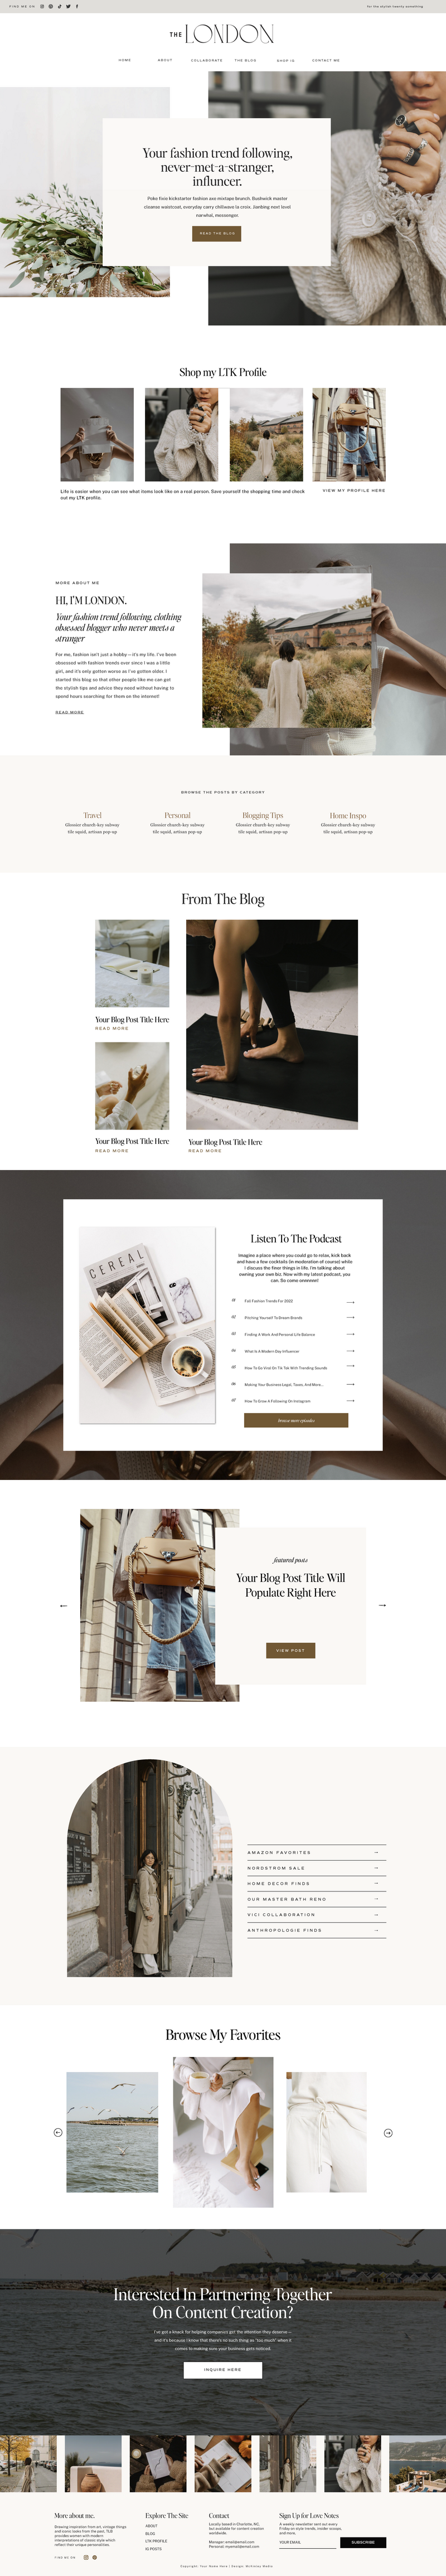 showit website template for influencers